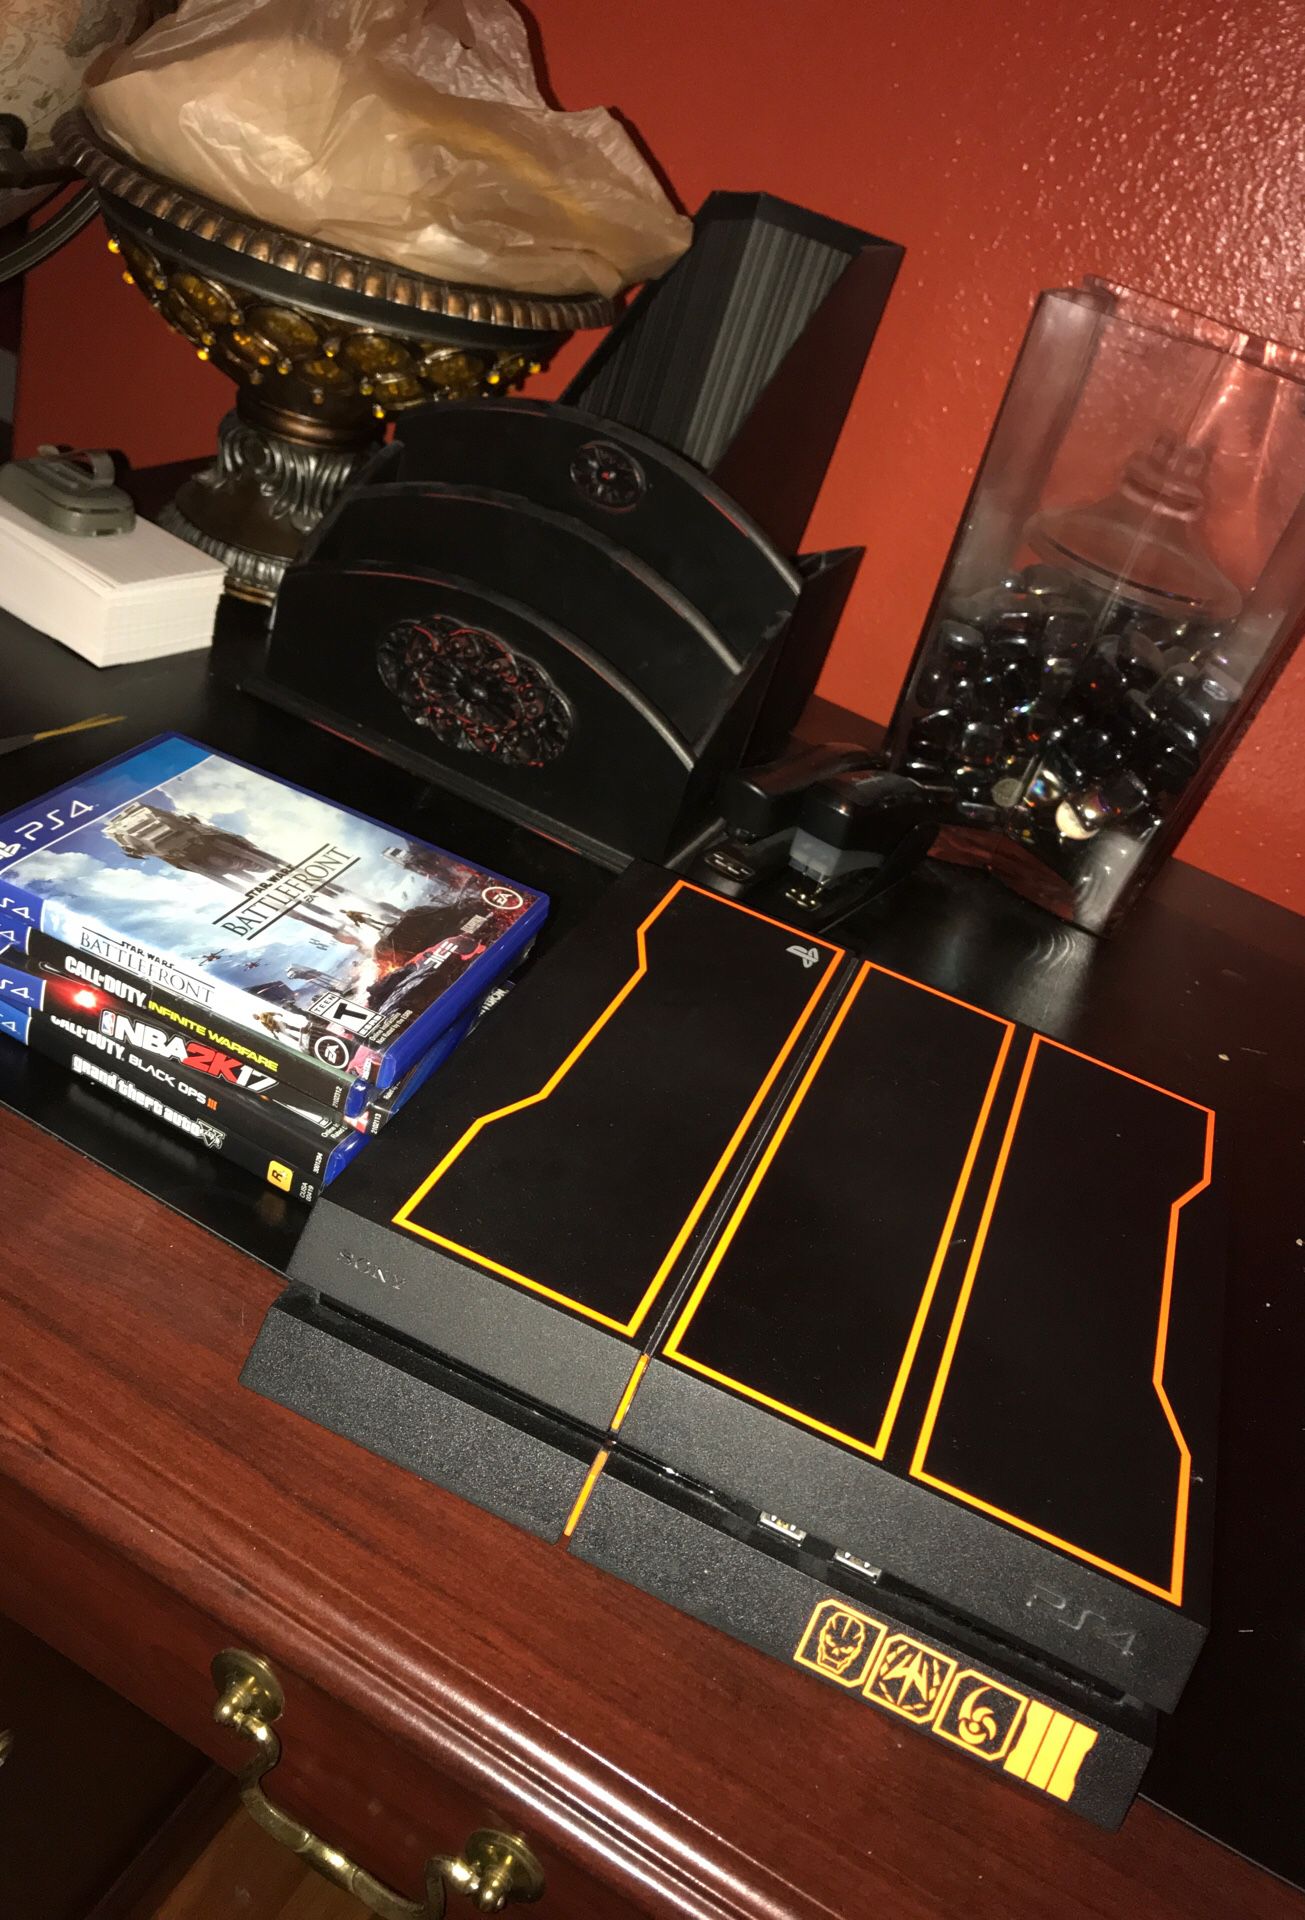 Limited edition black ops 3 ps4 1Tb bundle w games,headset, and controller